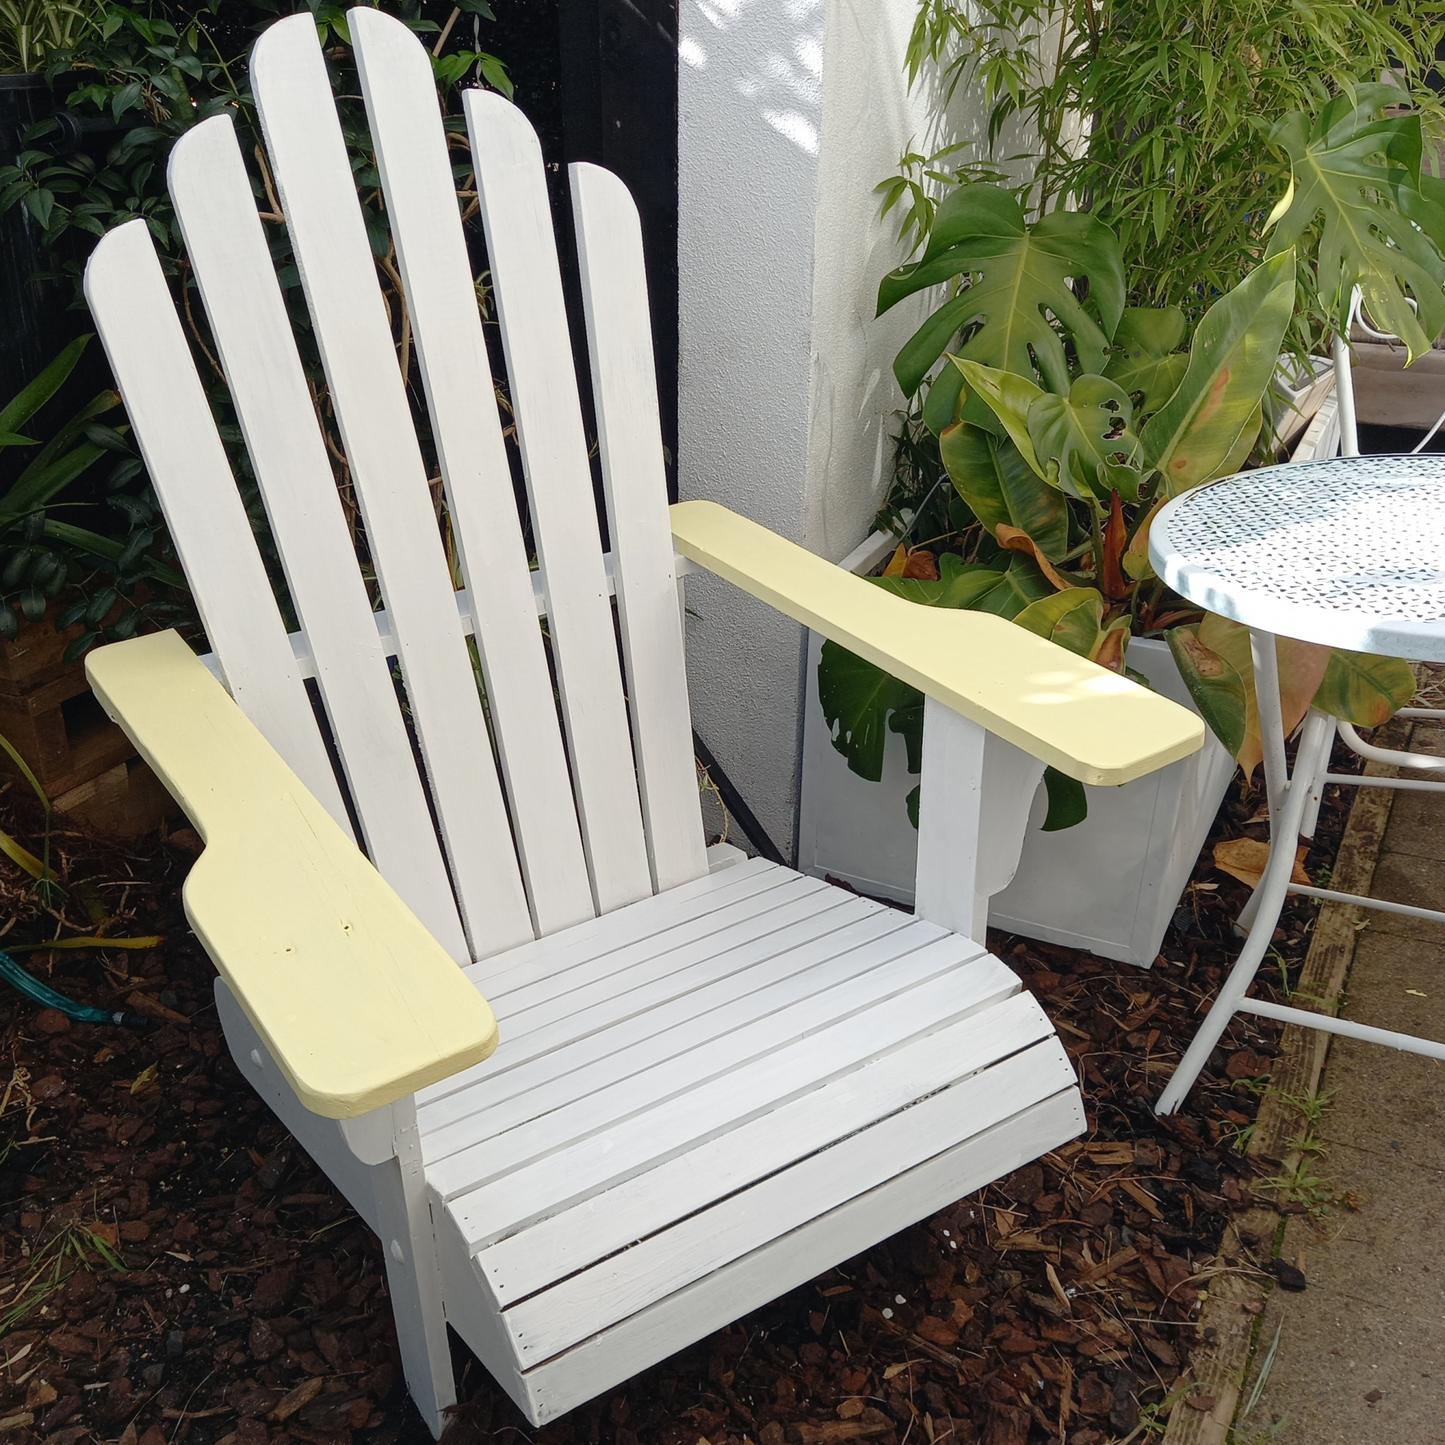 DIY plans to build an awesome Adirondack chair